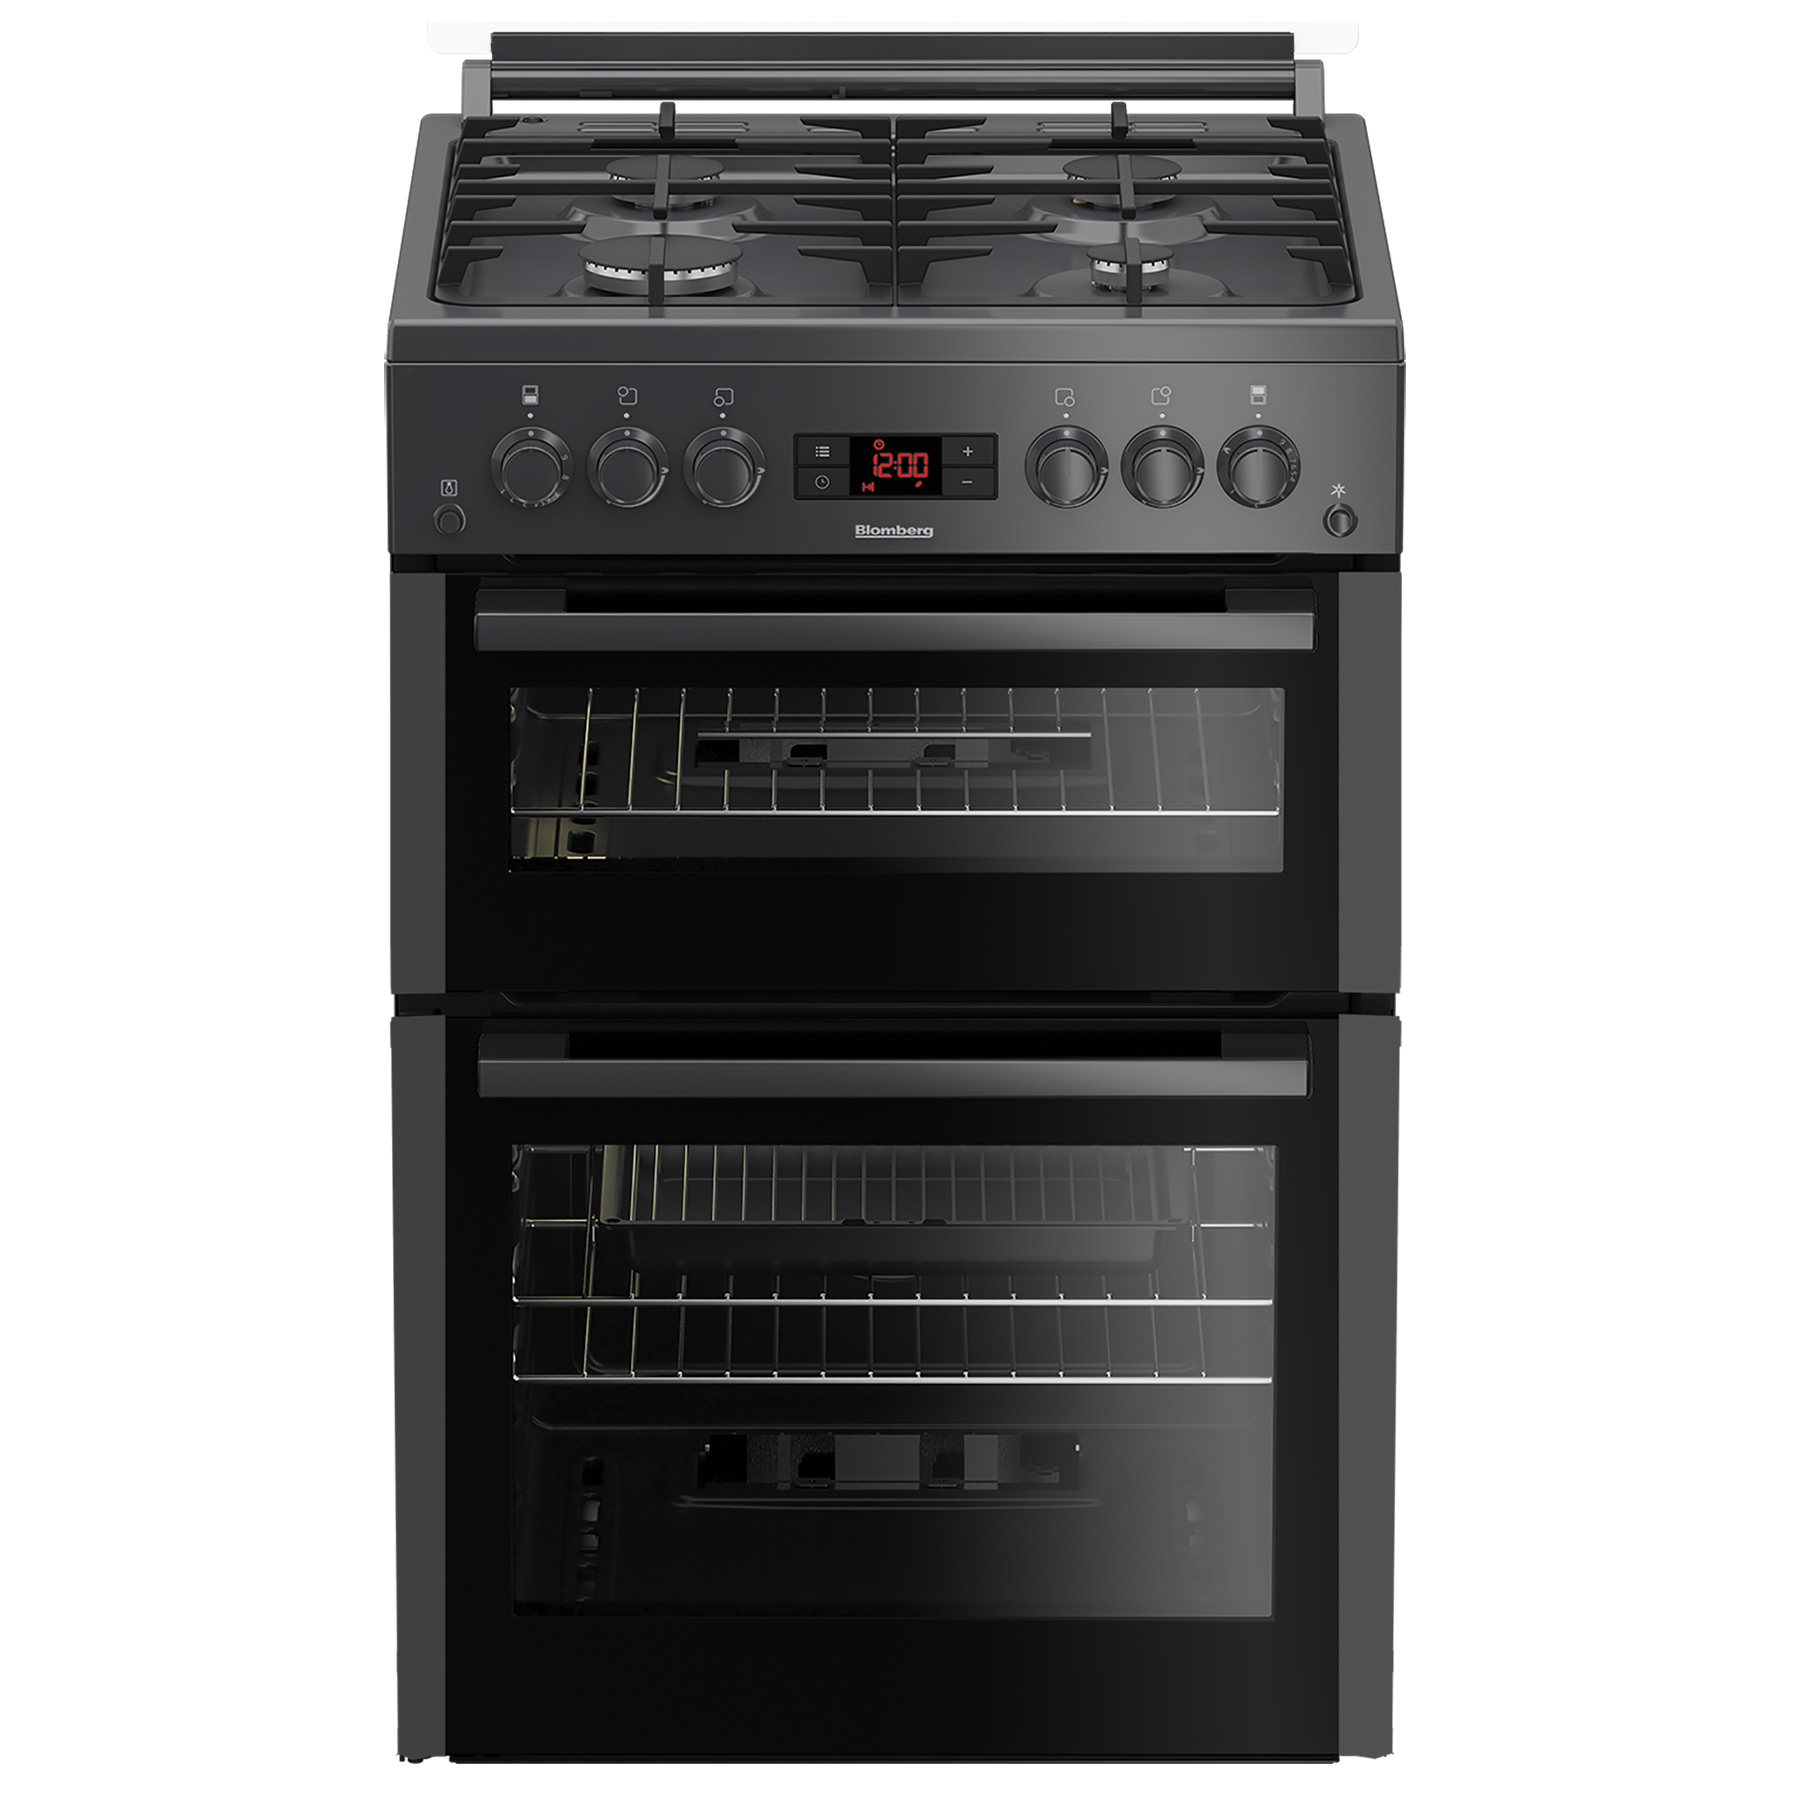 Image of Blomberg GGN65N 60cm Double Oven Gas Cooker in Anthracite 78 34 Litre